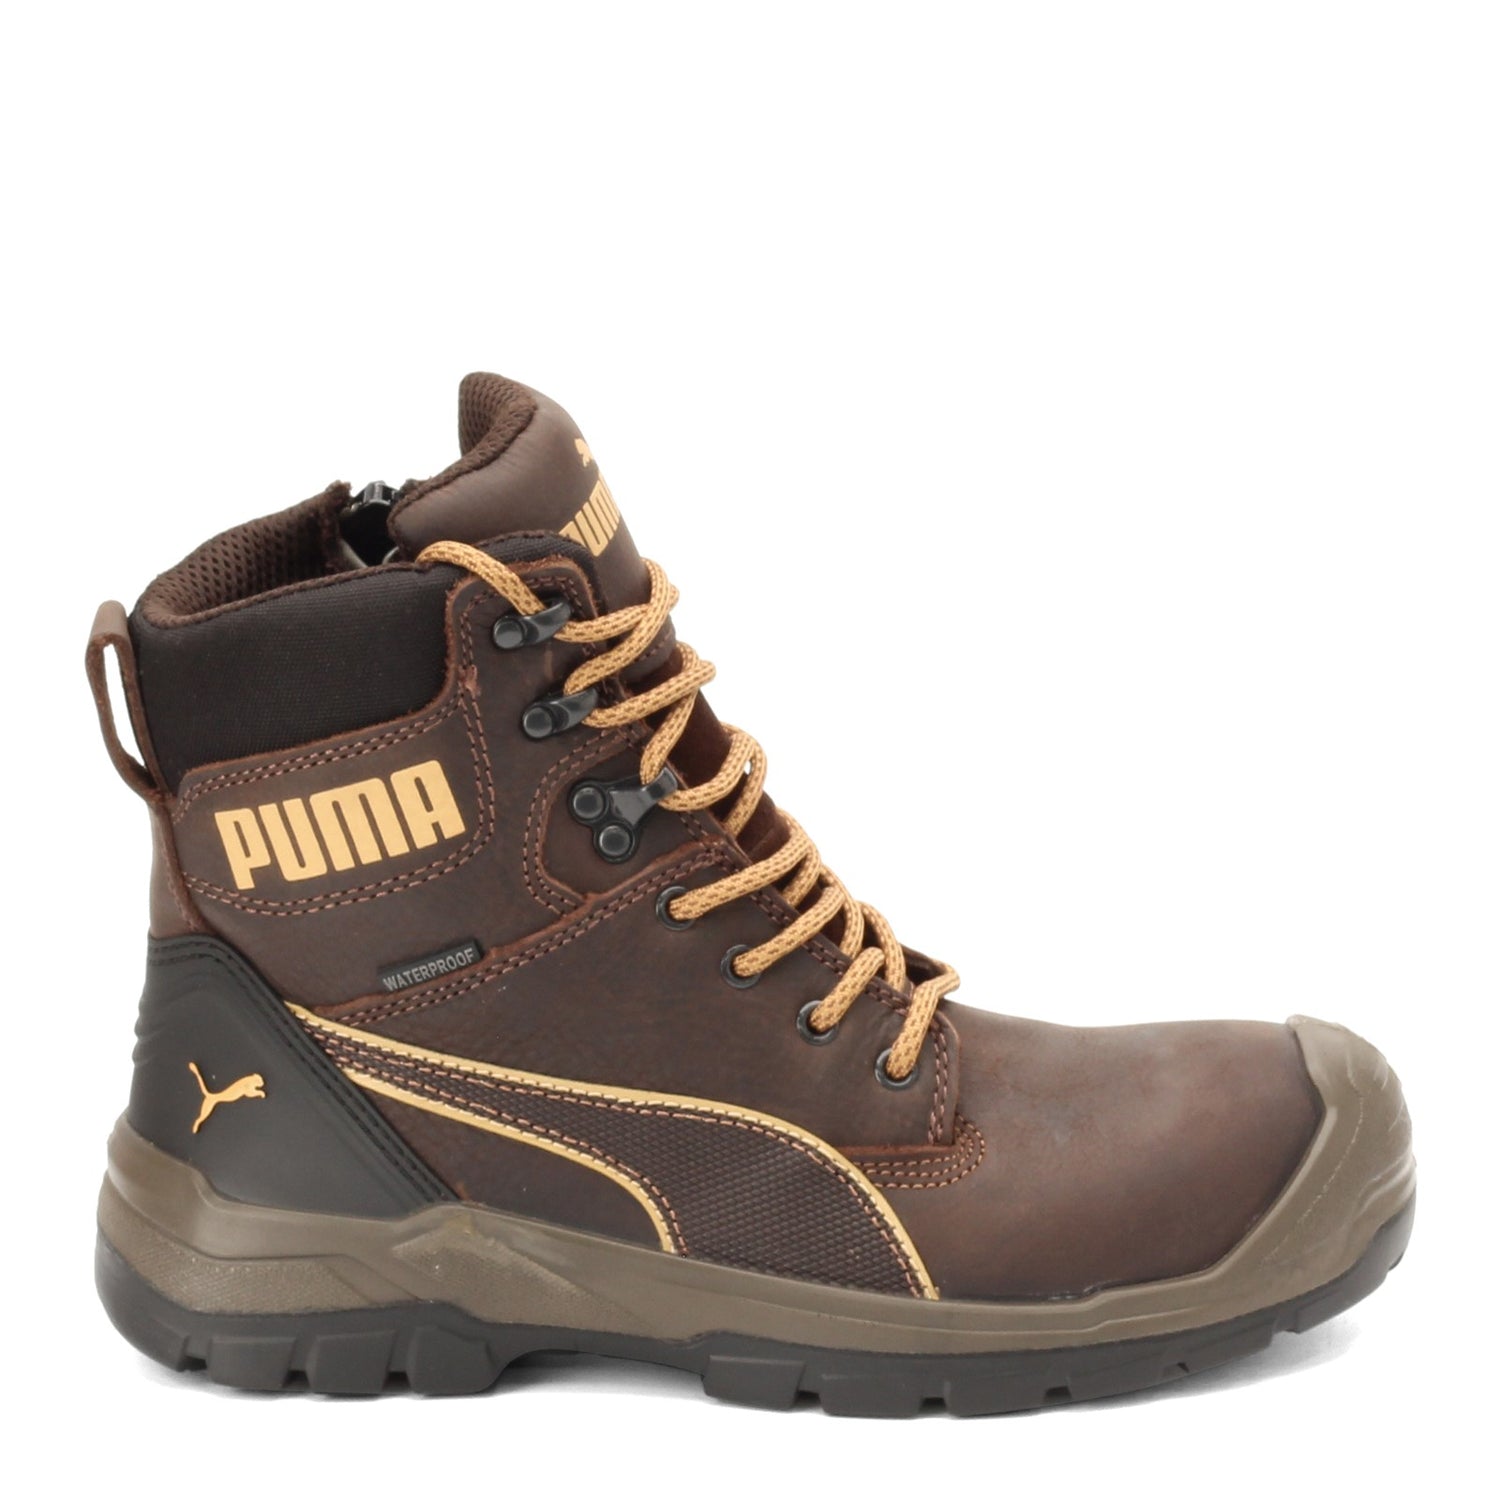 Peltz Shoes  Men's Puma Safety Conquest 7 Inch CTX Waterproof Boot BROWN 630655